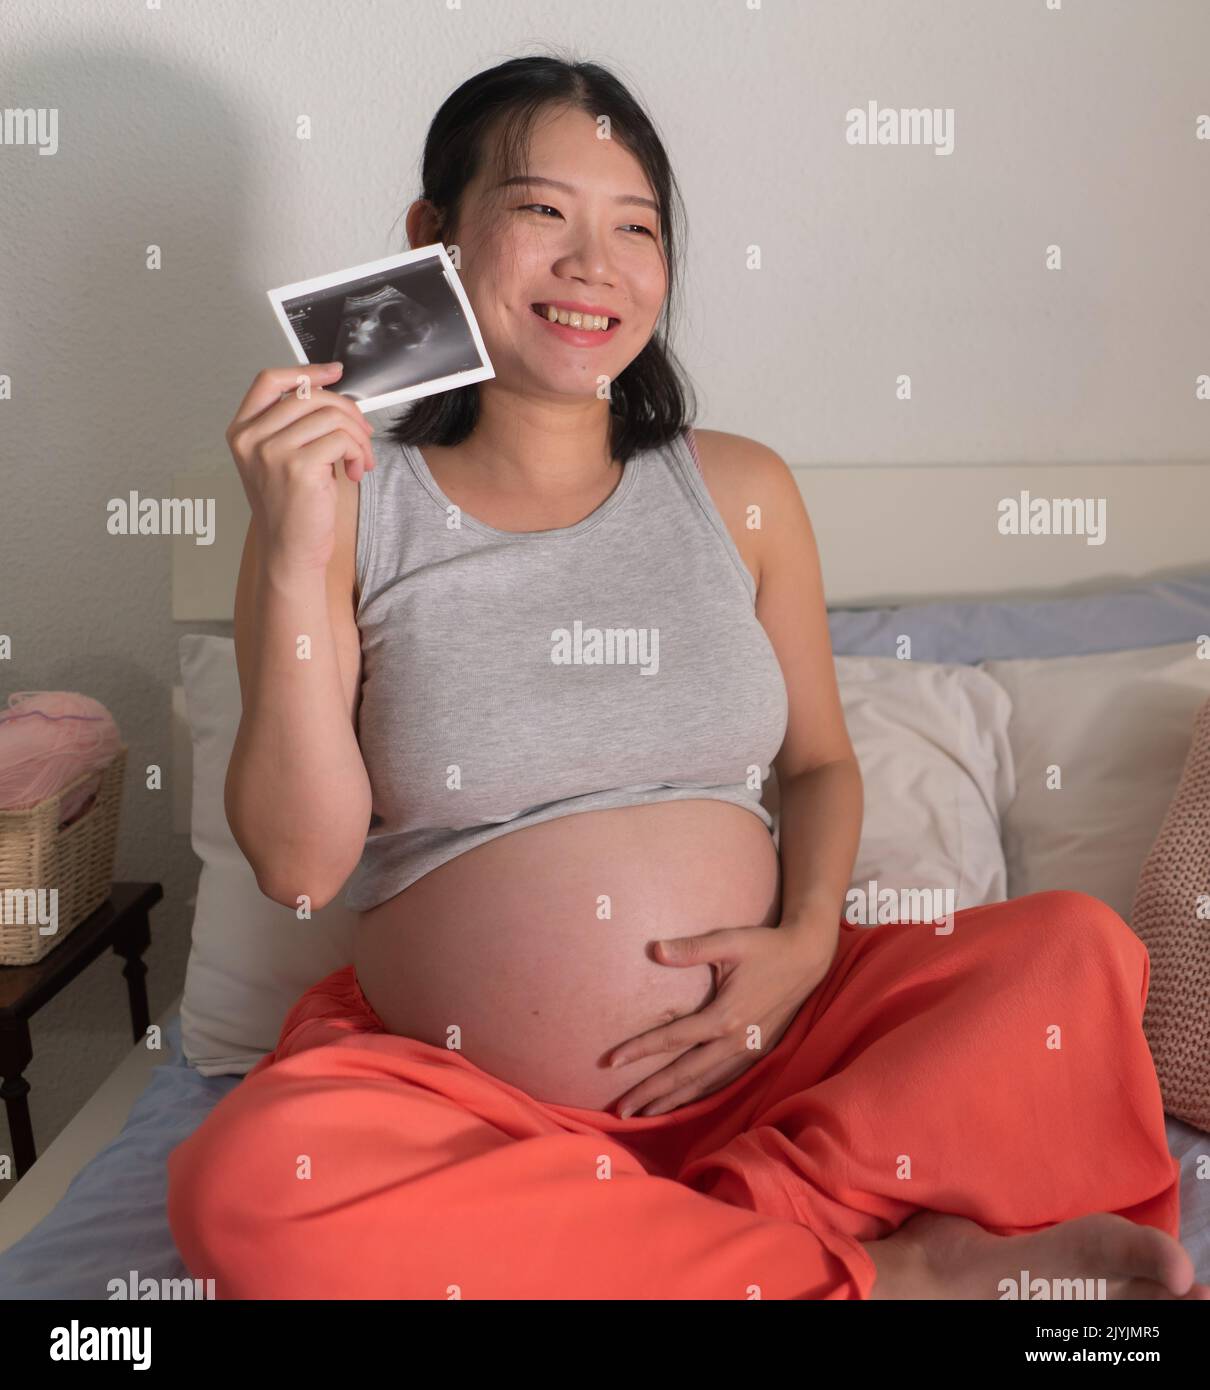 lifestyle home portrait of young happy and beautiful Asian Japanese woman pregnant sitting on bed holding ultrasound photo excited in pregnancy and ma Stock Photo